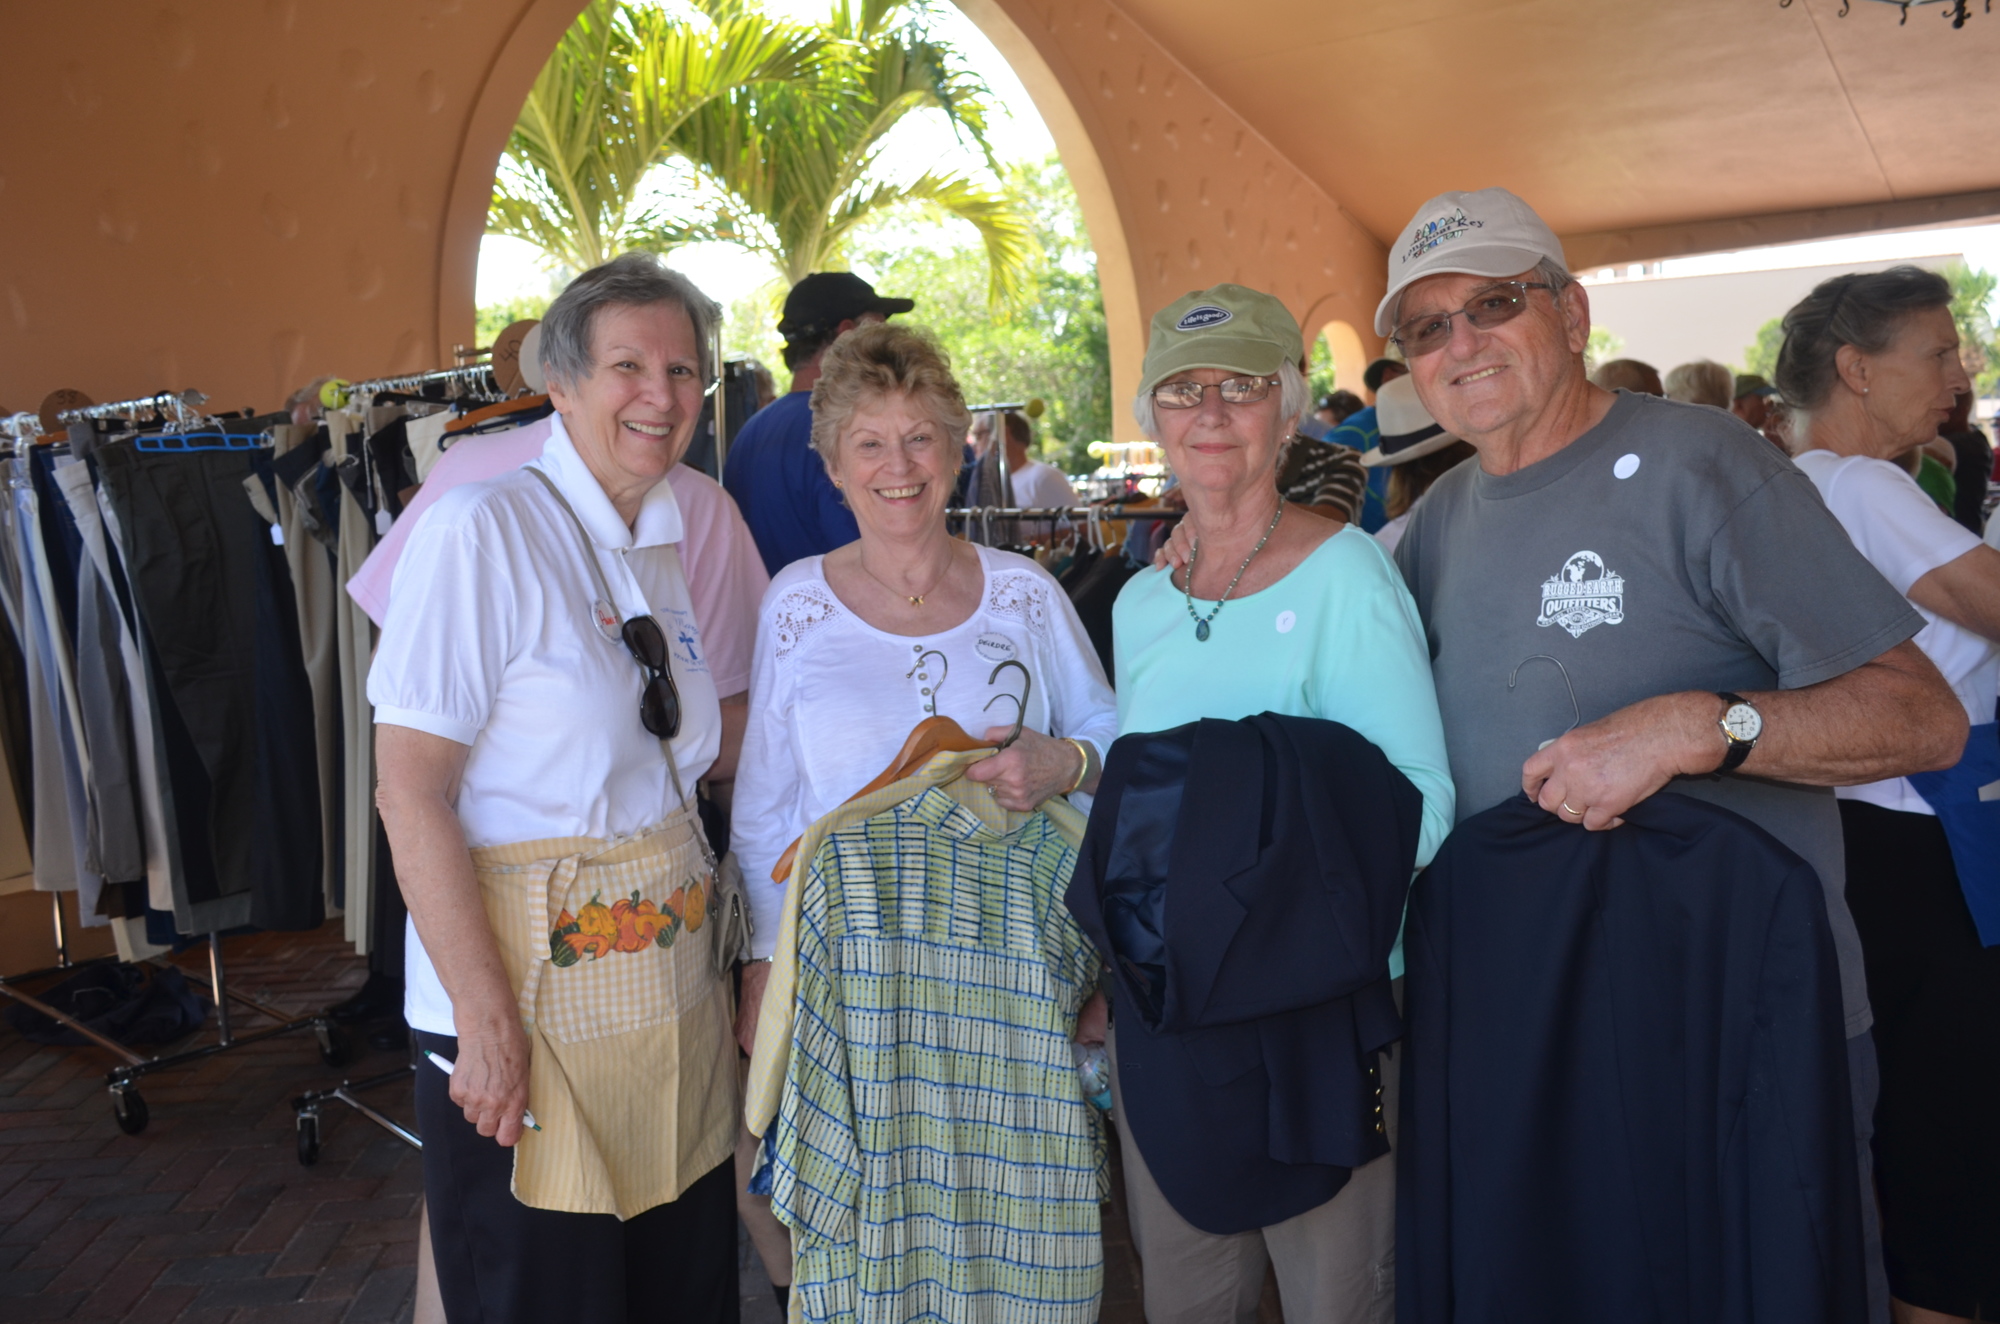 Annette Hogan, Deirdre Schueppert and Cynthia and Stan Slater shop at last year's St. Mary's Rummage Sale.